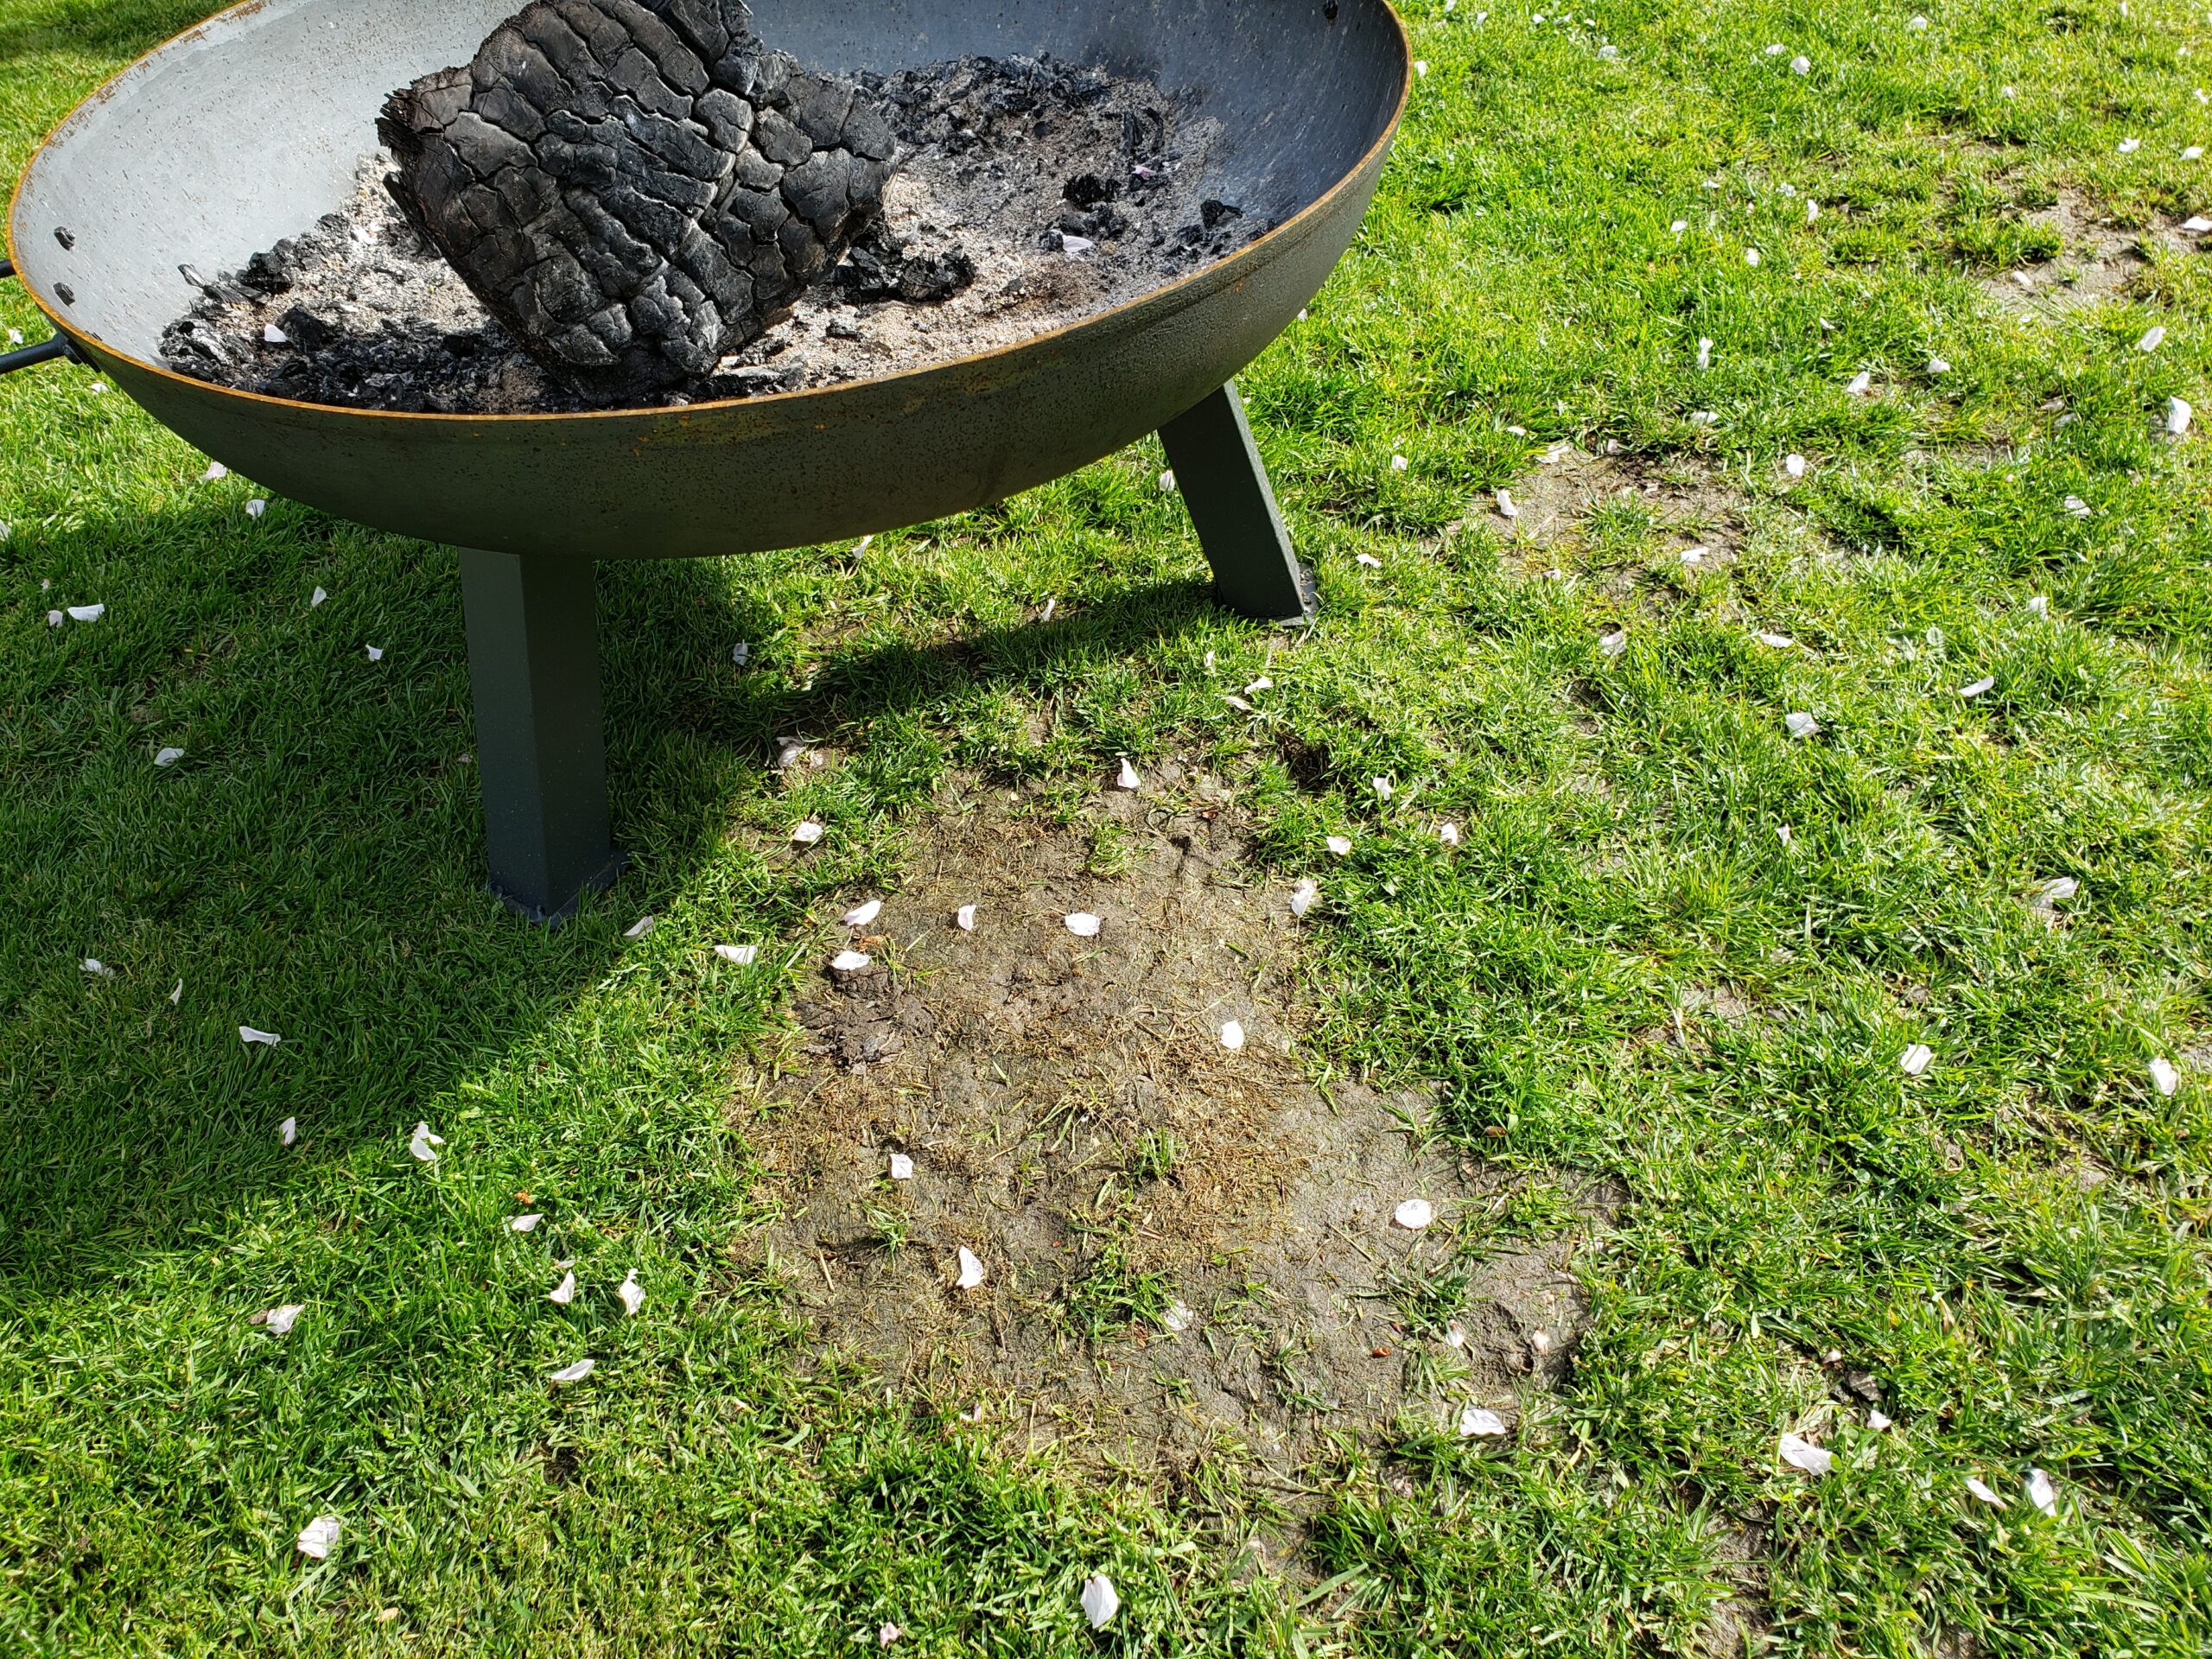 Fire Pit On Grass 5 Best Ways To, Are Fire Pits Safe On Grass